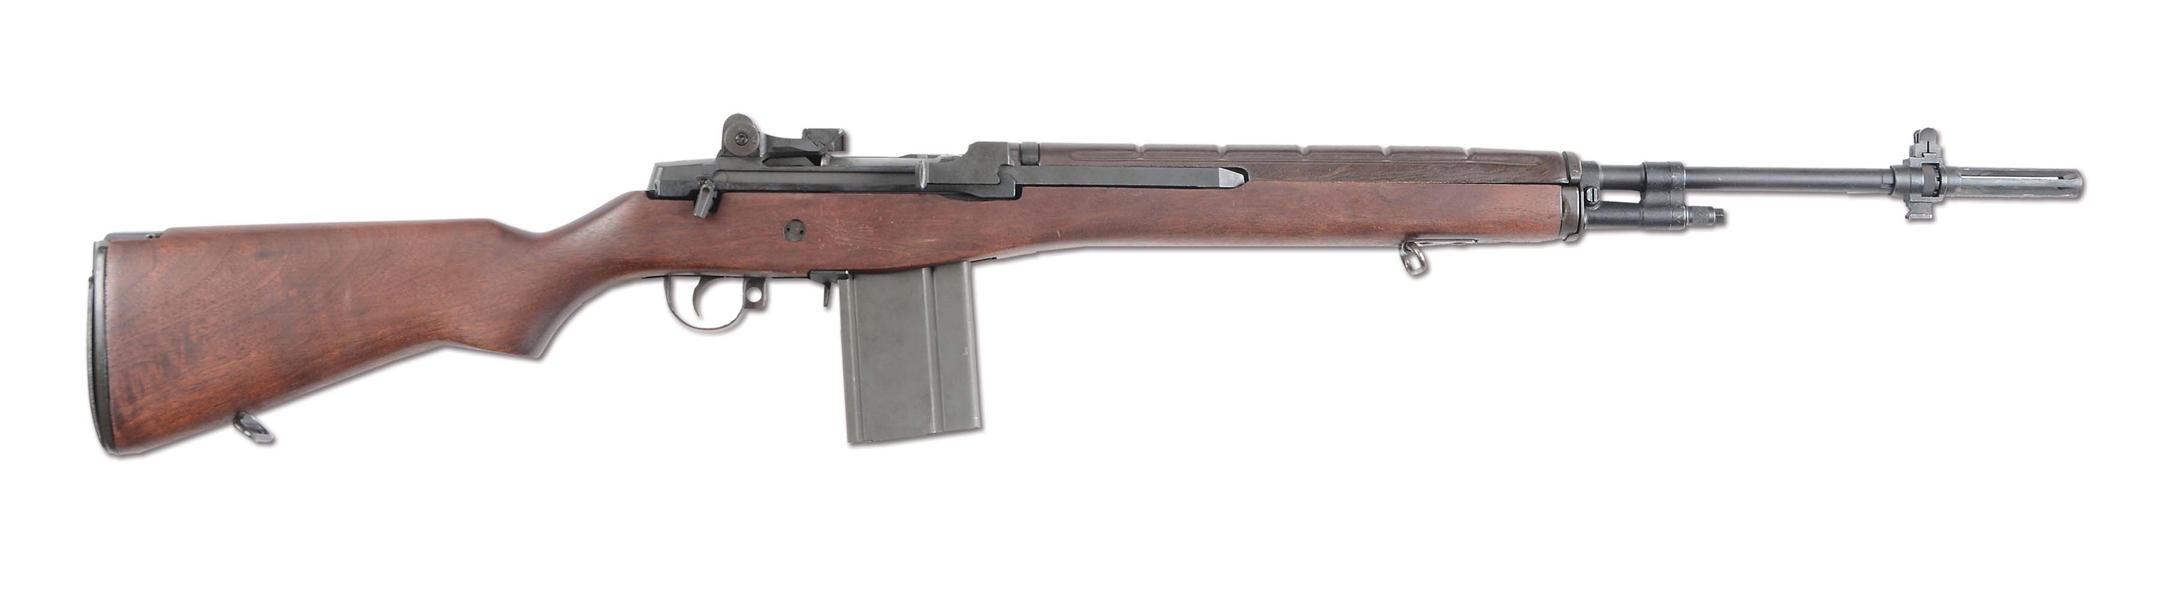 (N) INCREDIBLE AND HISTORIC HARRINGTON AND RICHARDSON EXPERIMENTAL U.S. M-14 MACHINE GUN WITH SPARE SHORT BARREL & EARLY DEVELOPMENTAL FOLDING STOCK ASSEMBLY (CURIO AND RELIC)